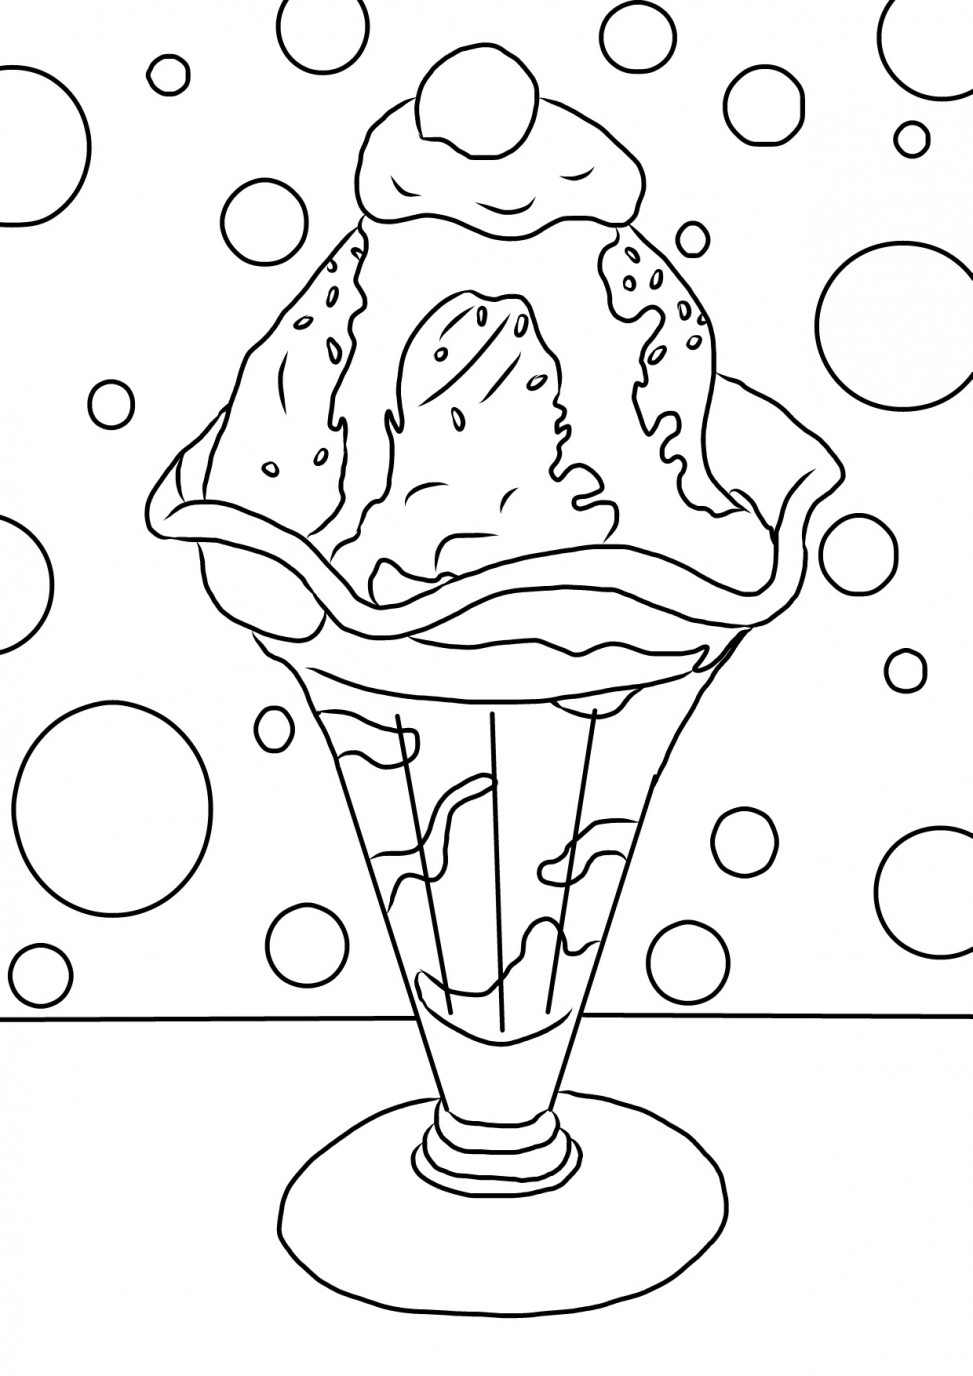 Ice Cream Colouring Sheet | Food | TheColouringBook.org